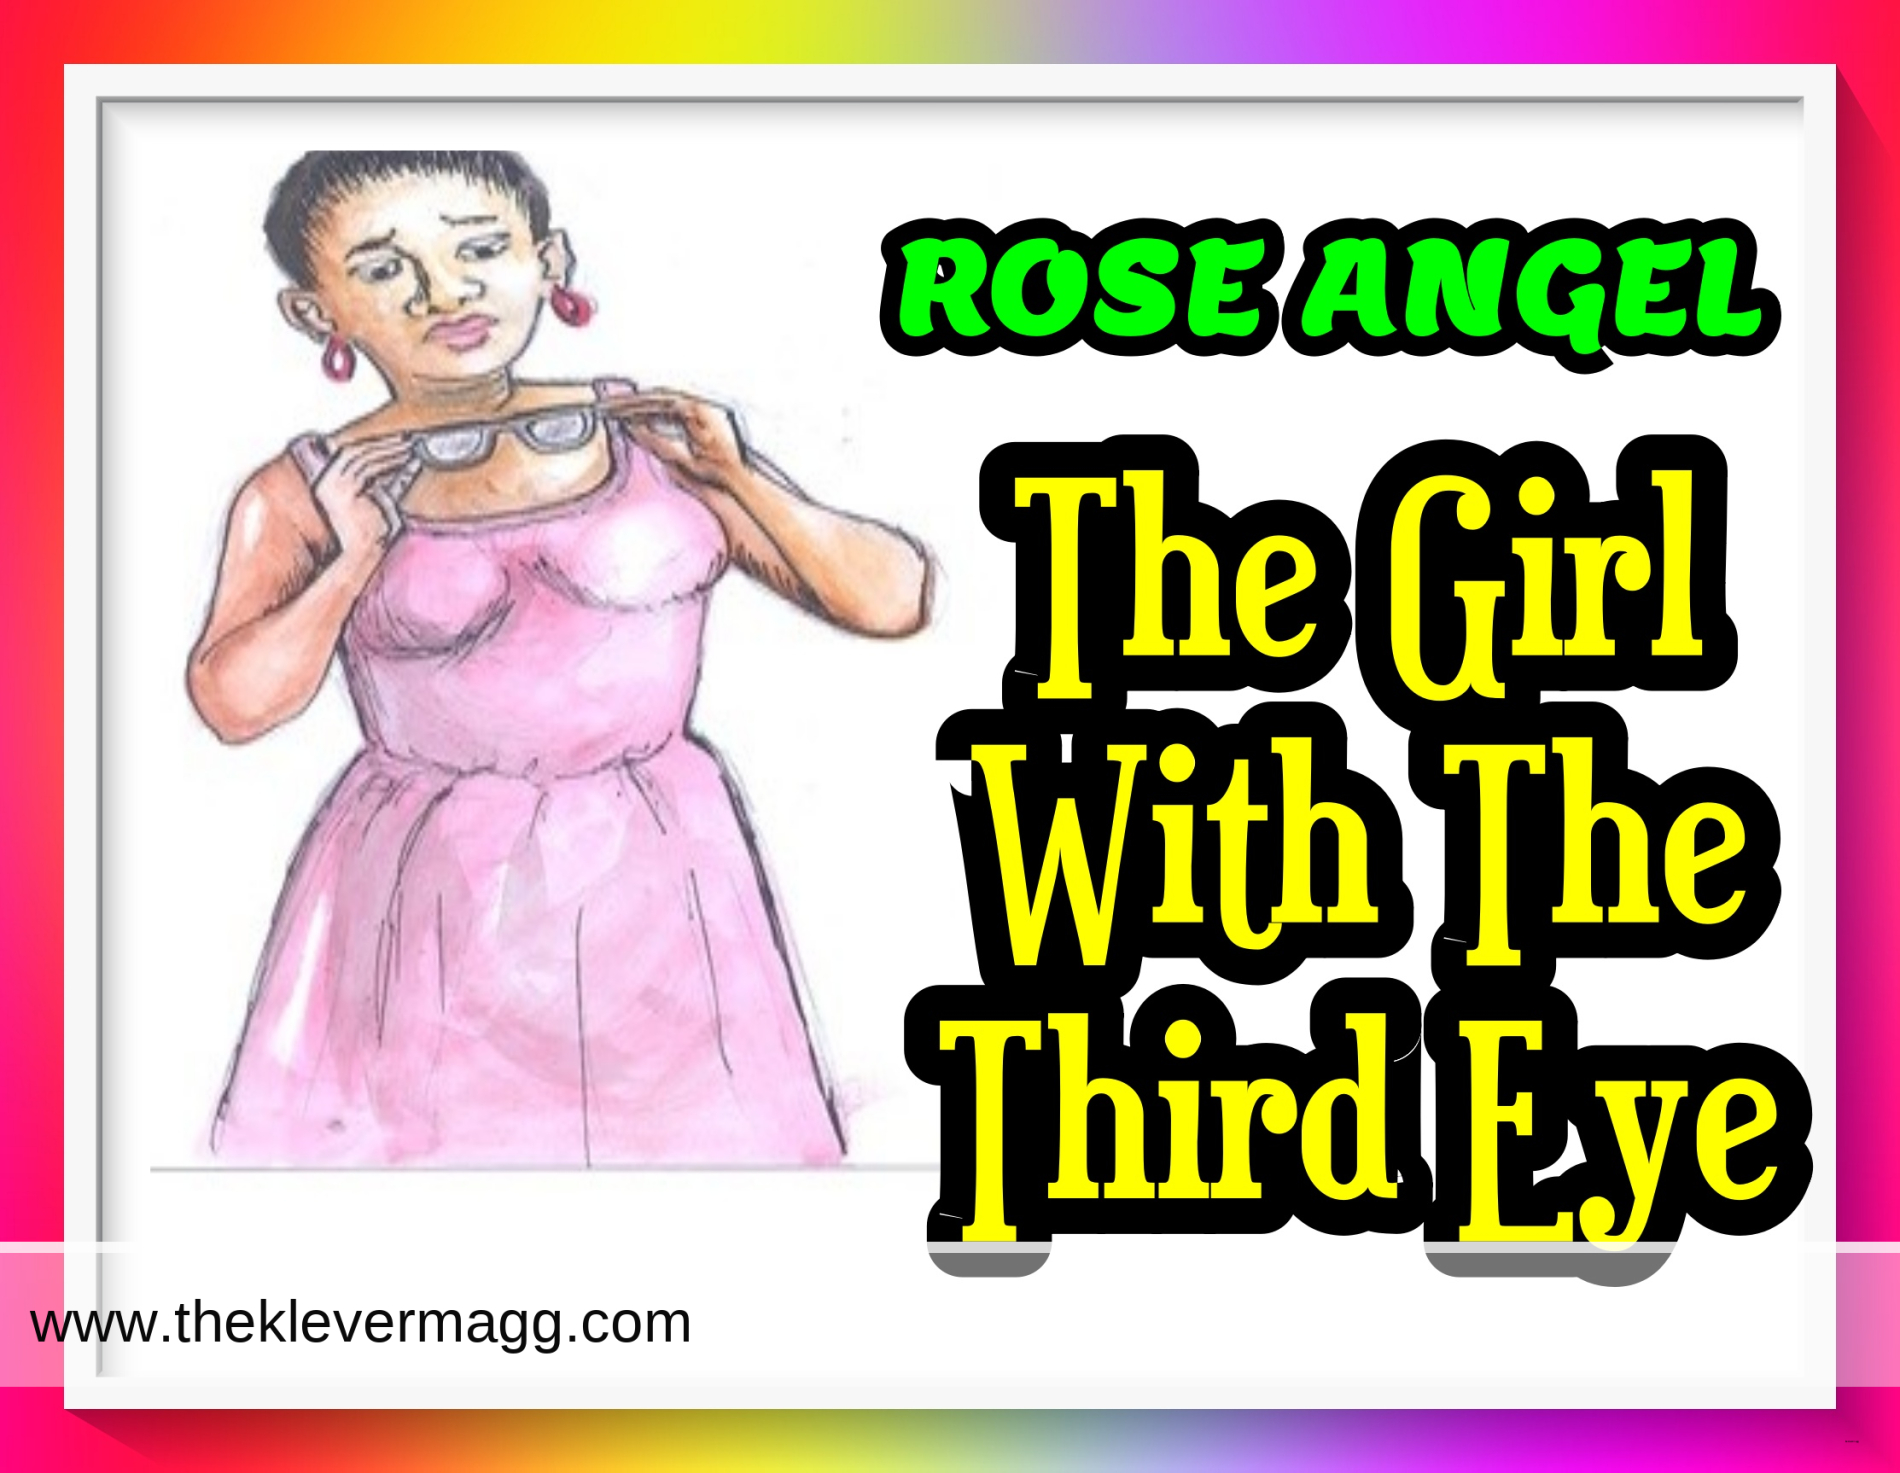 image for the girl with the third eye